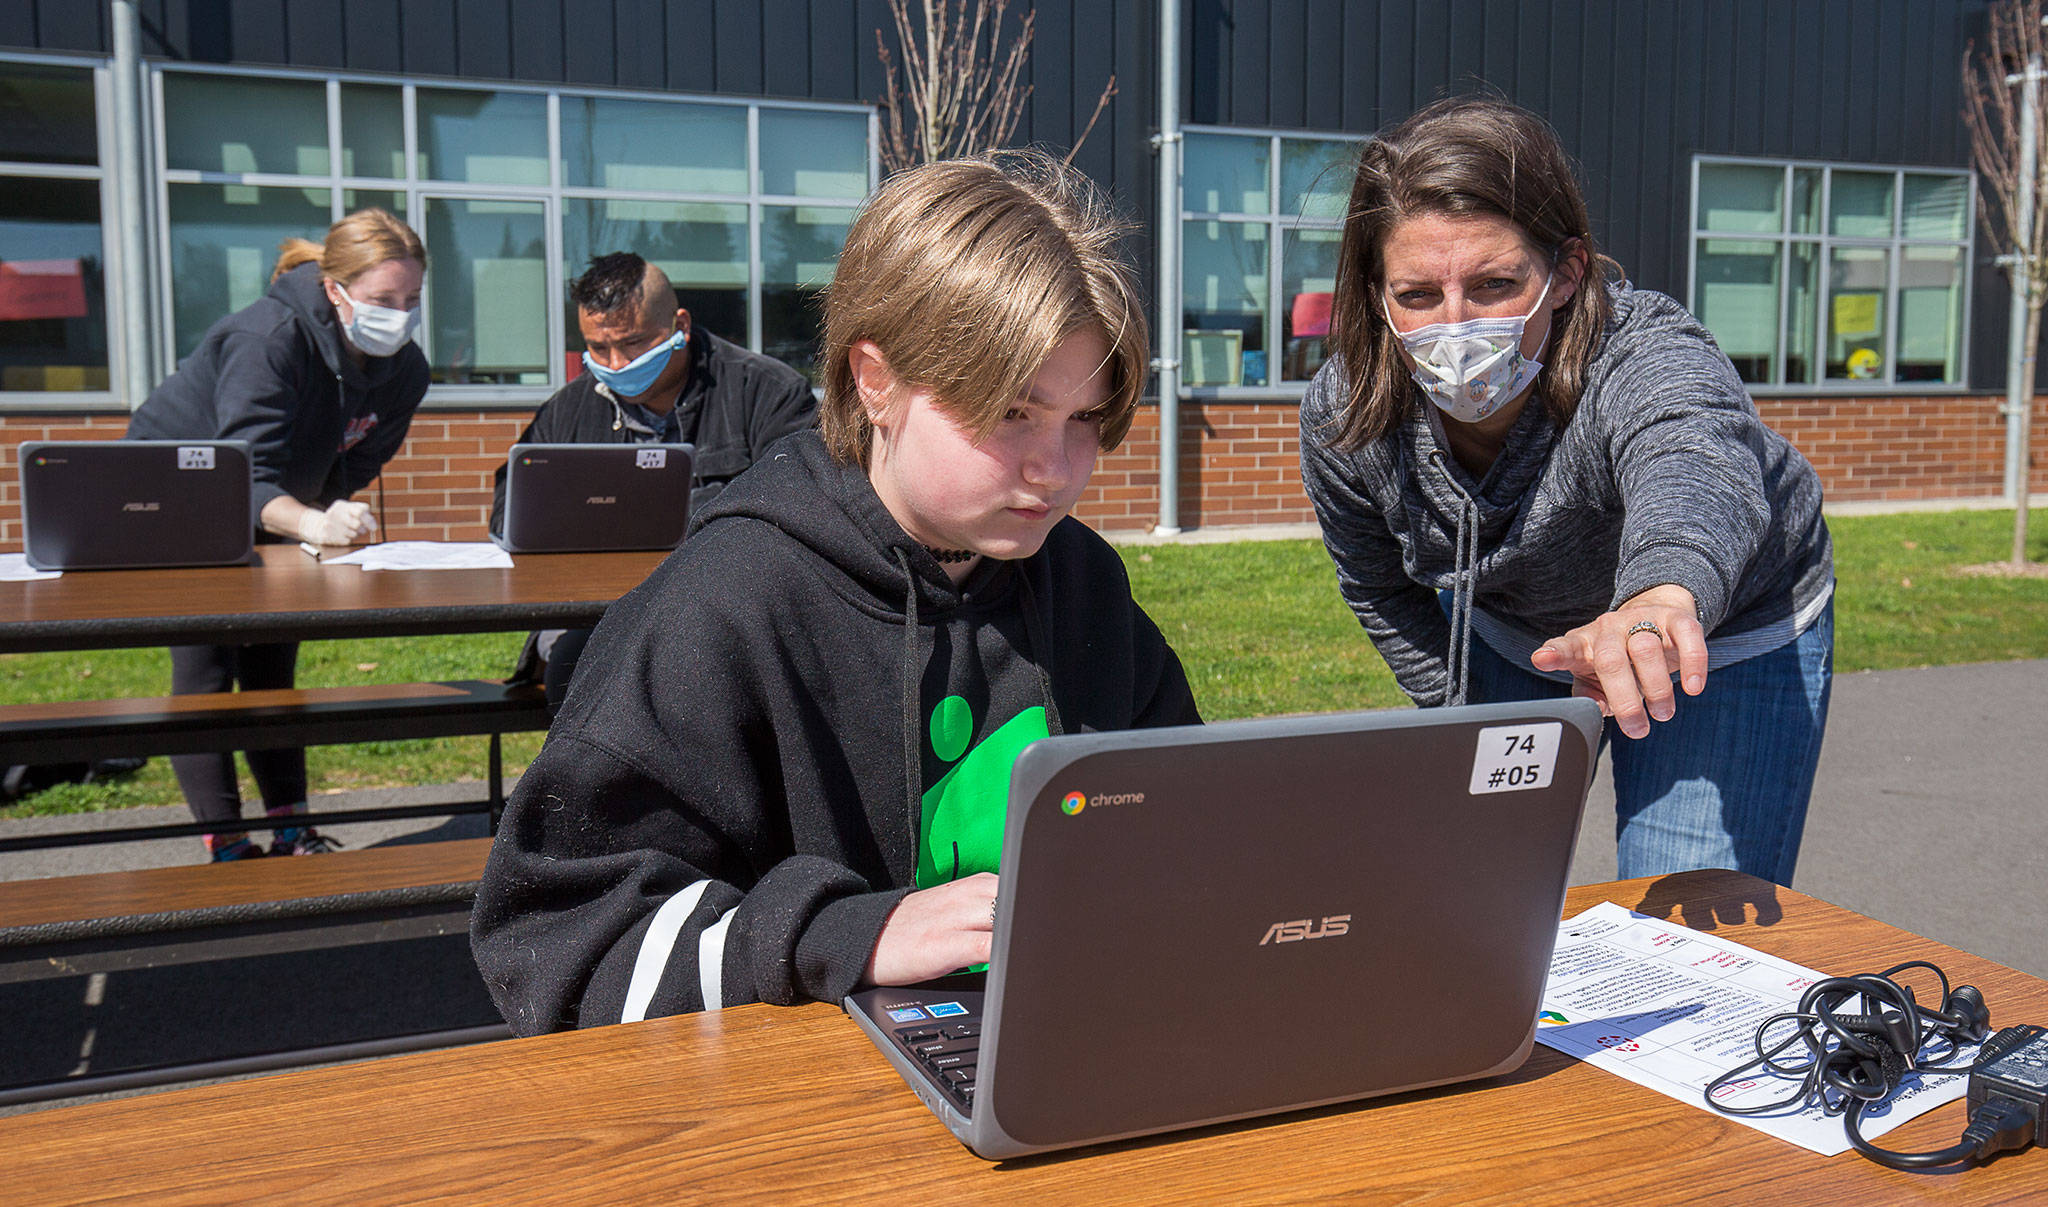 Fifth-grader Vivian Fisher get help setting up a laptop from Jody Urban at Frank Wagoner Elementary in April, as the Monroe School District began preparations for students to finish the school year remotely. (Andy Bronson / Herald file photo)